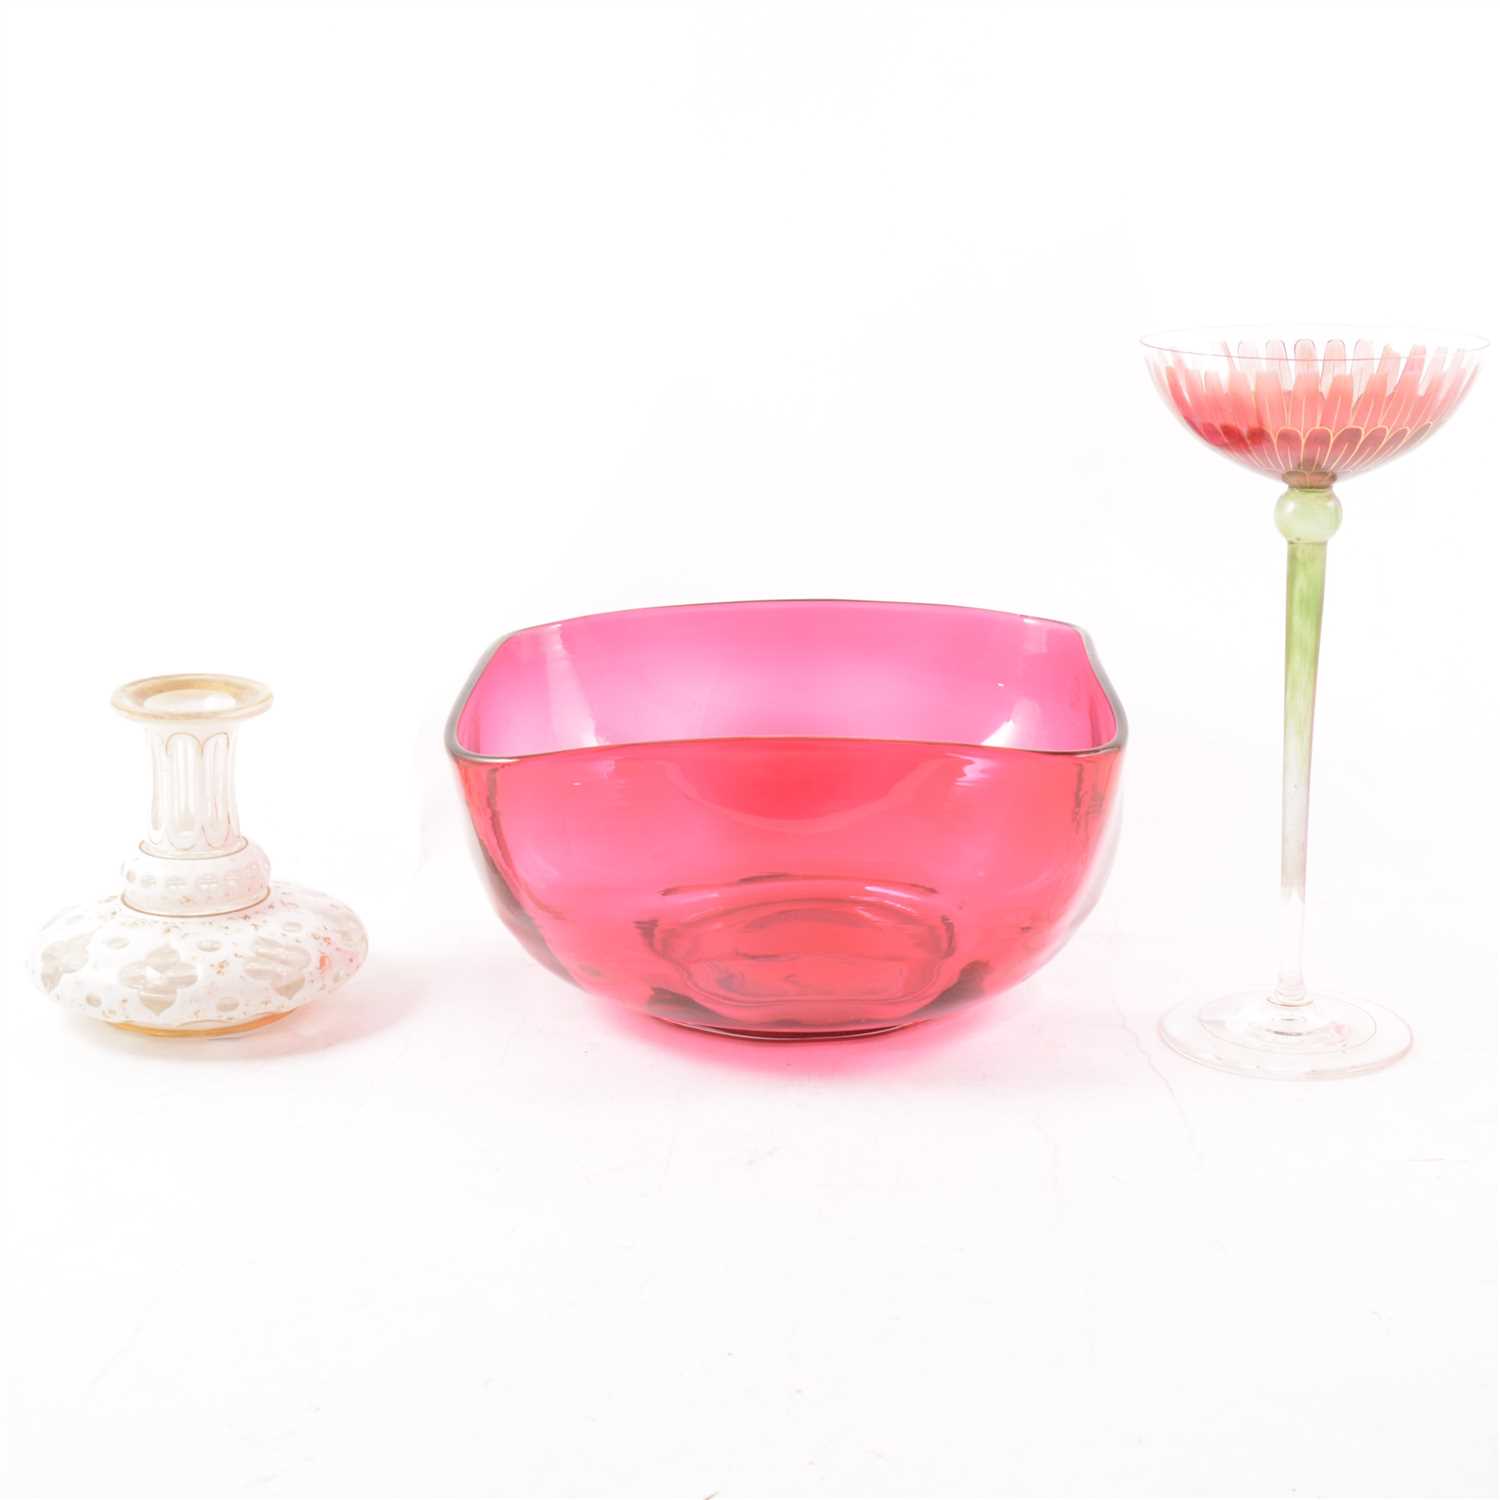 Lot 51 - A cranberry glass dish, square with curved corners, a small white overlaid glass vase, faded gilded decoration, and an Art Deco tall hand painted glass